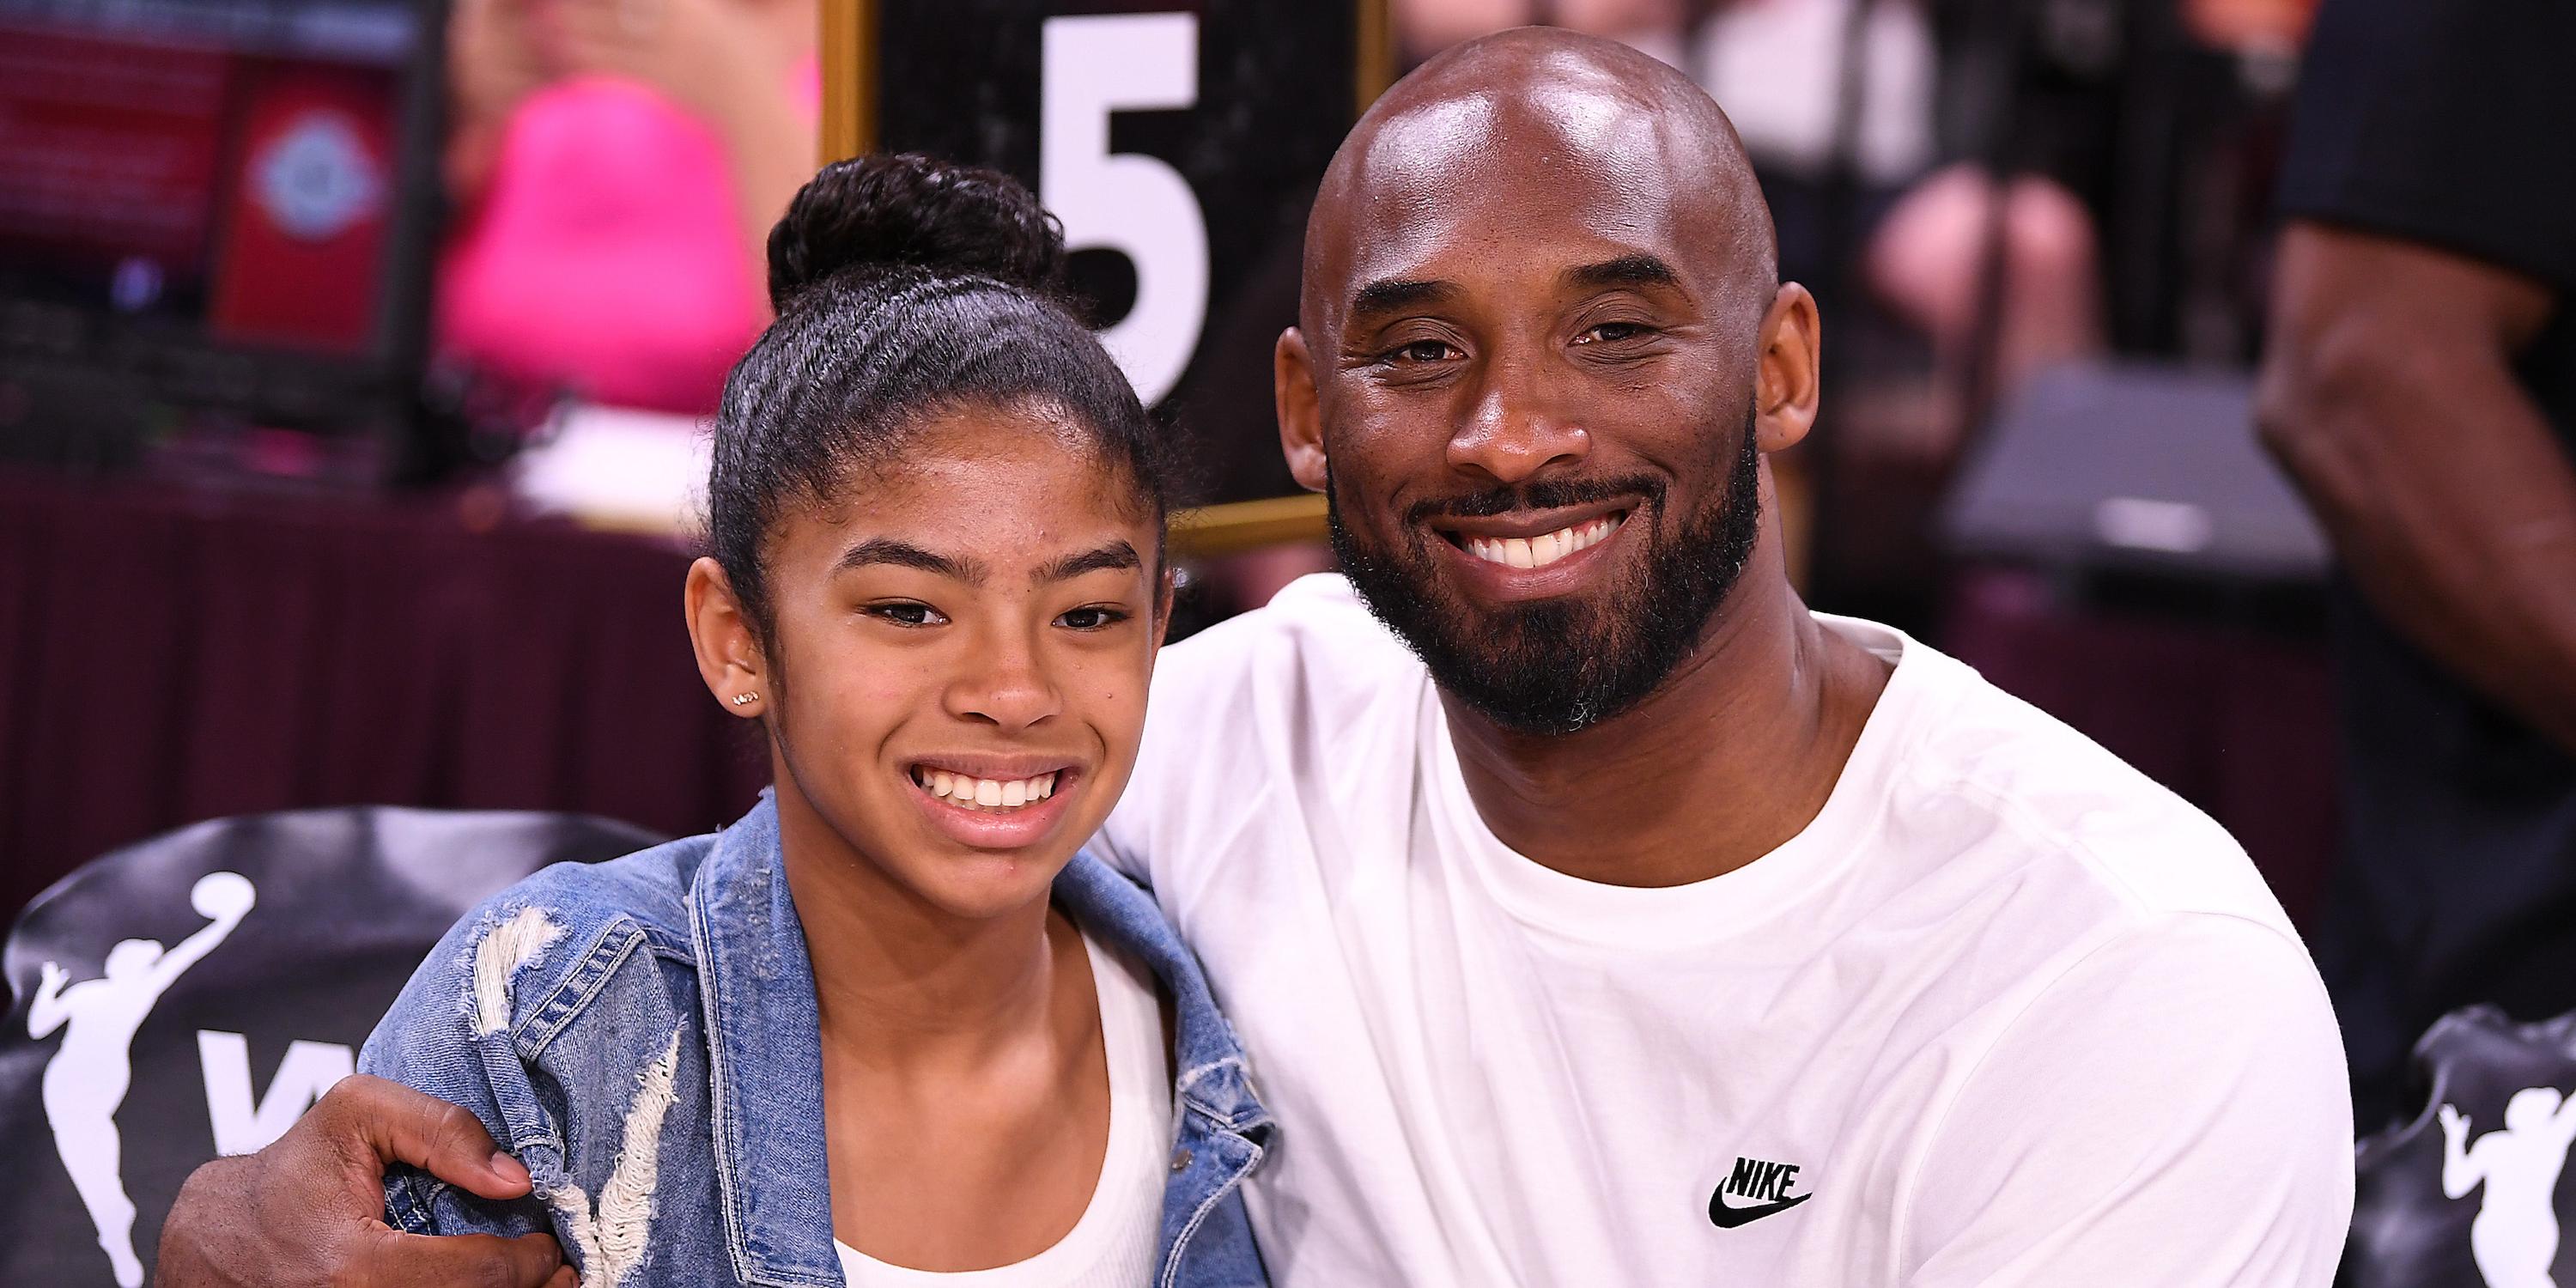 Kobe and Gianna Bryant were traveling to the Mamba Academy in Thousand Oaks, California, for a basketball practice when the crash occurred.